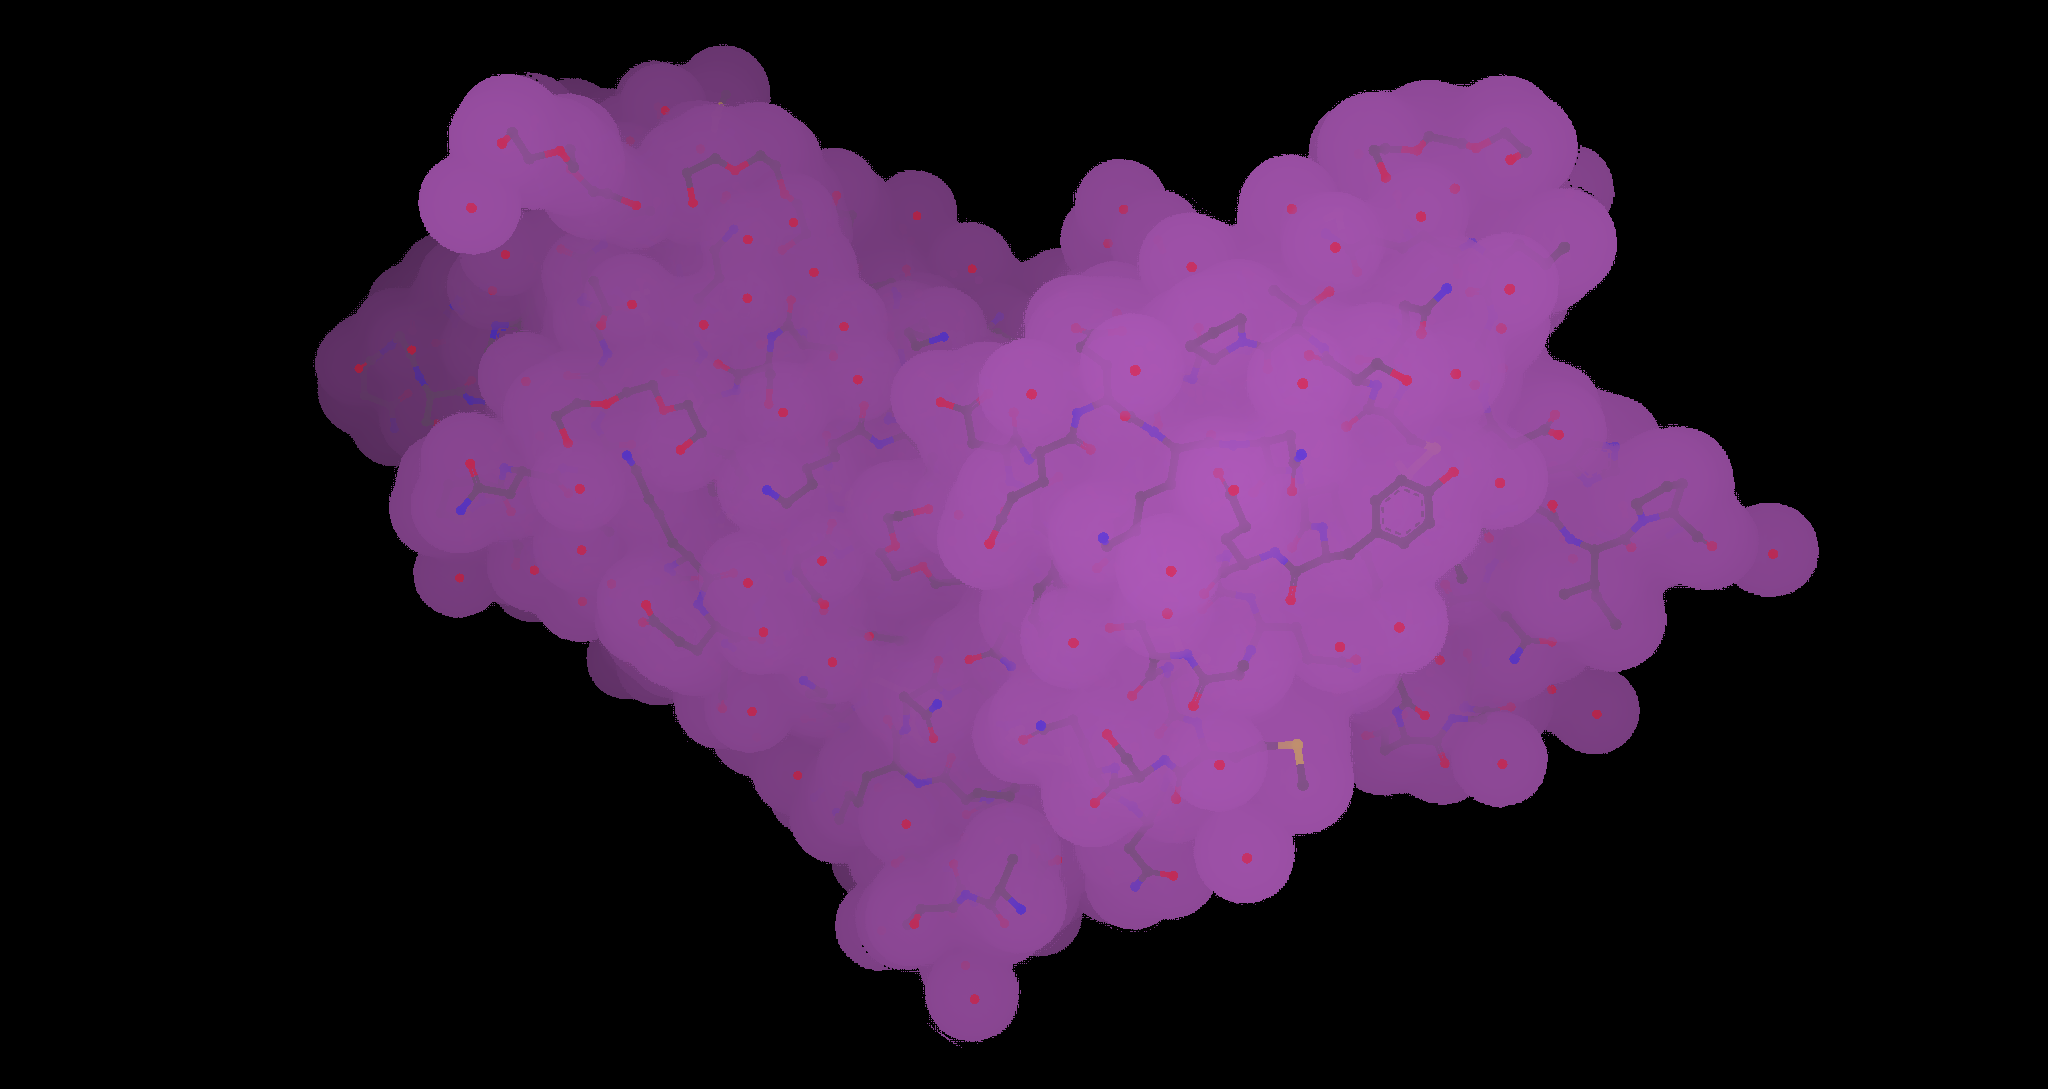 A rendering of a large protein molecule where the internal structure is visible through a foggy representation of the solvent exclusive surface of the molecule.